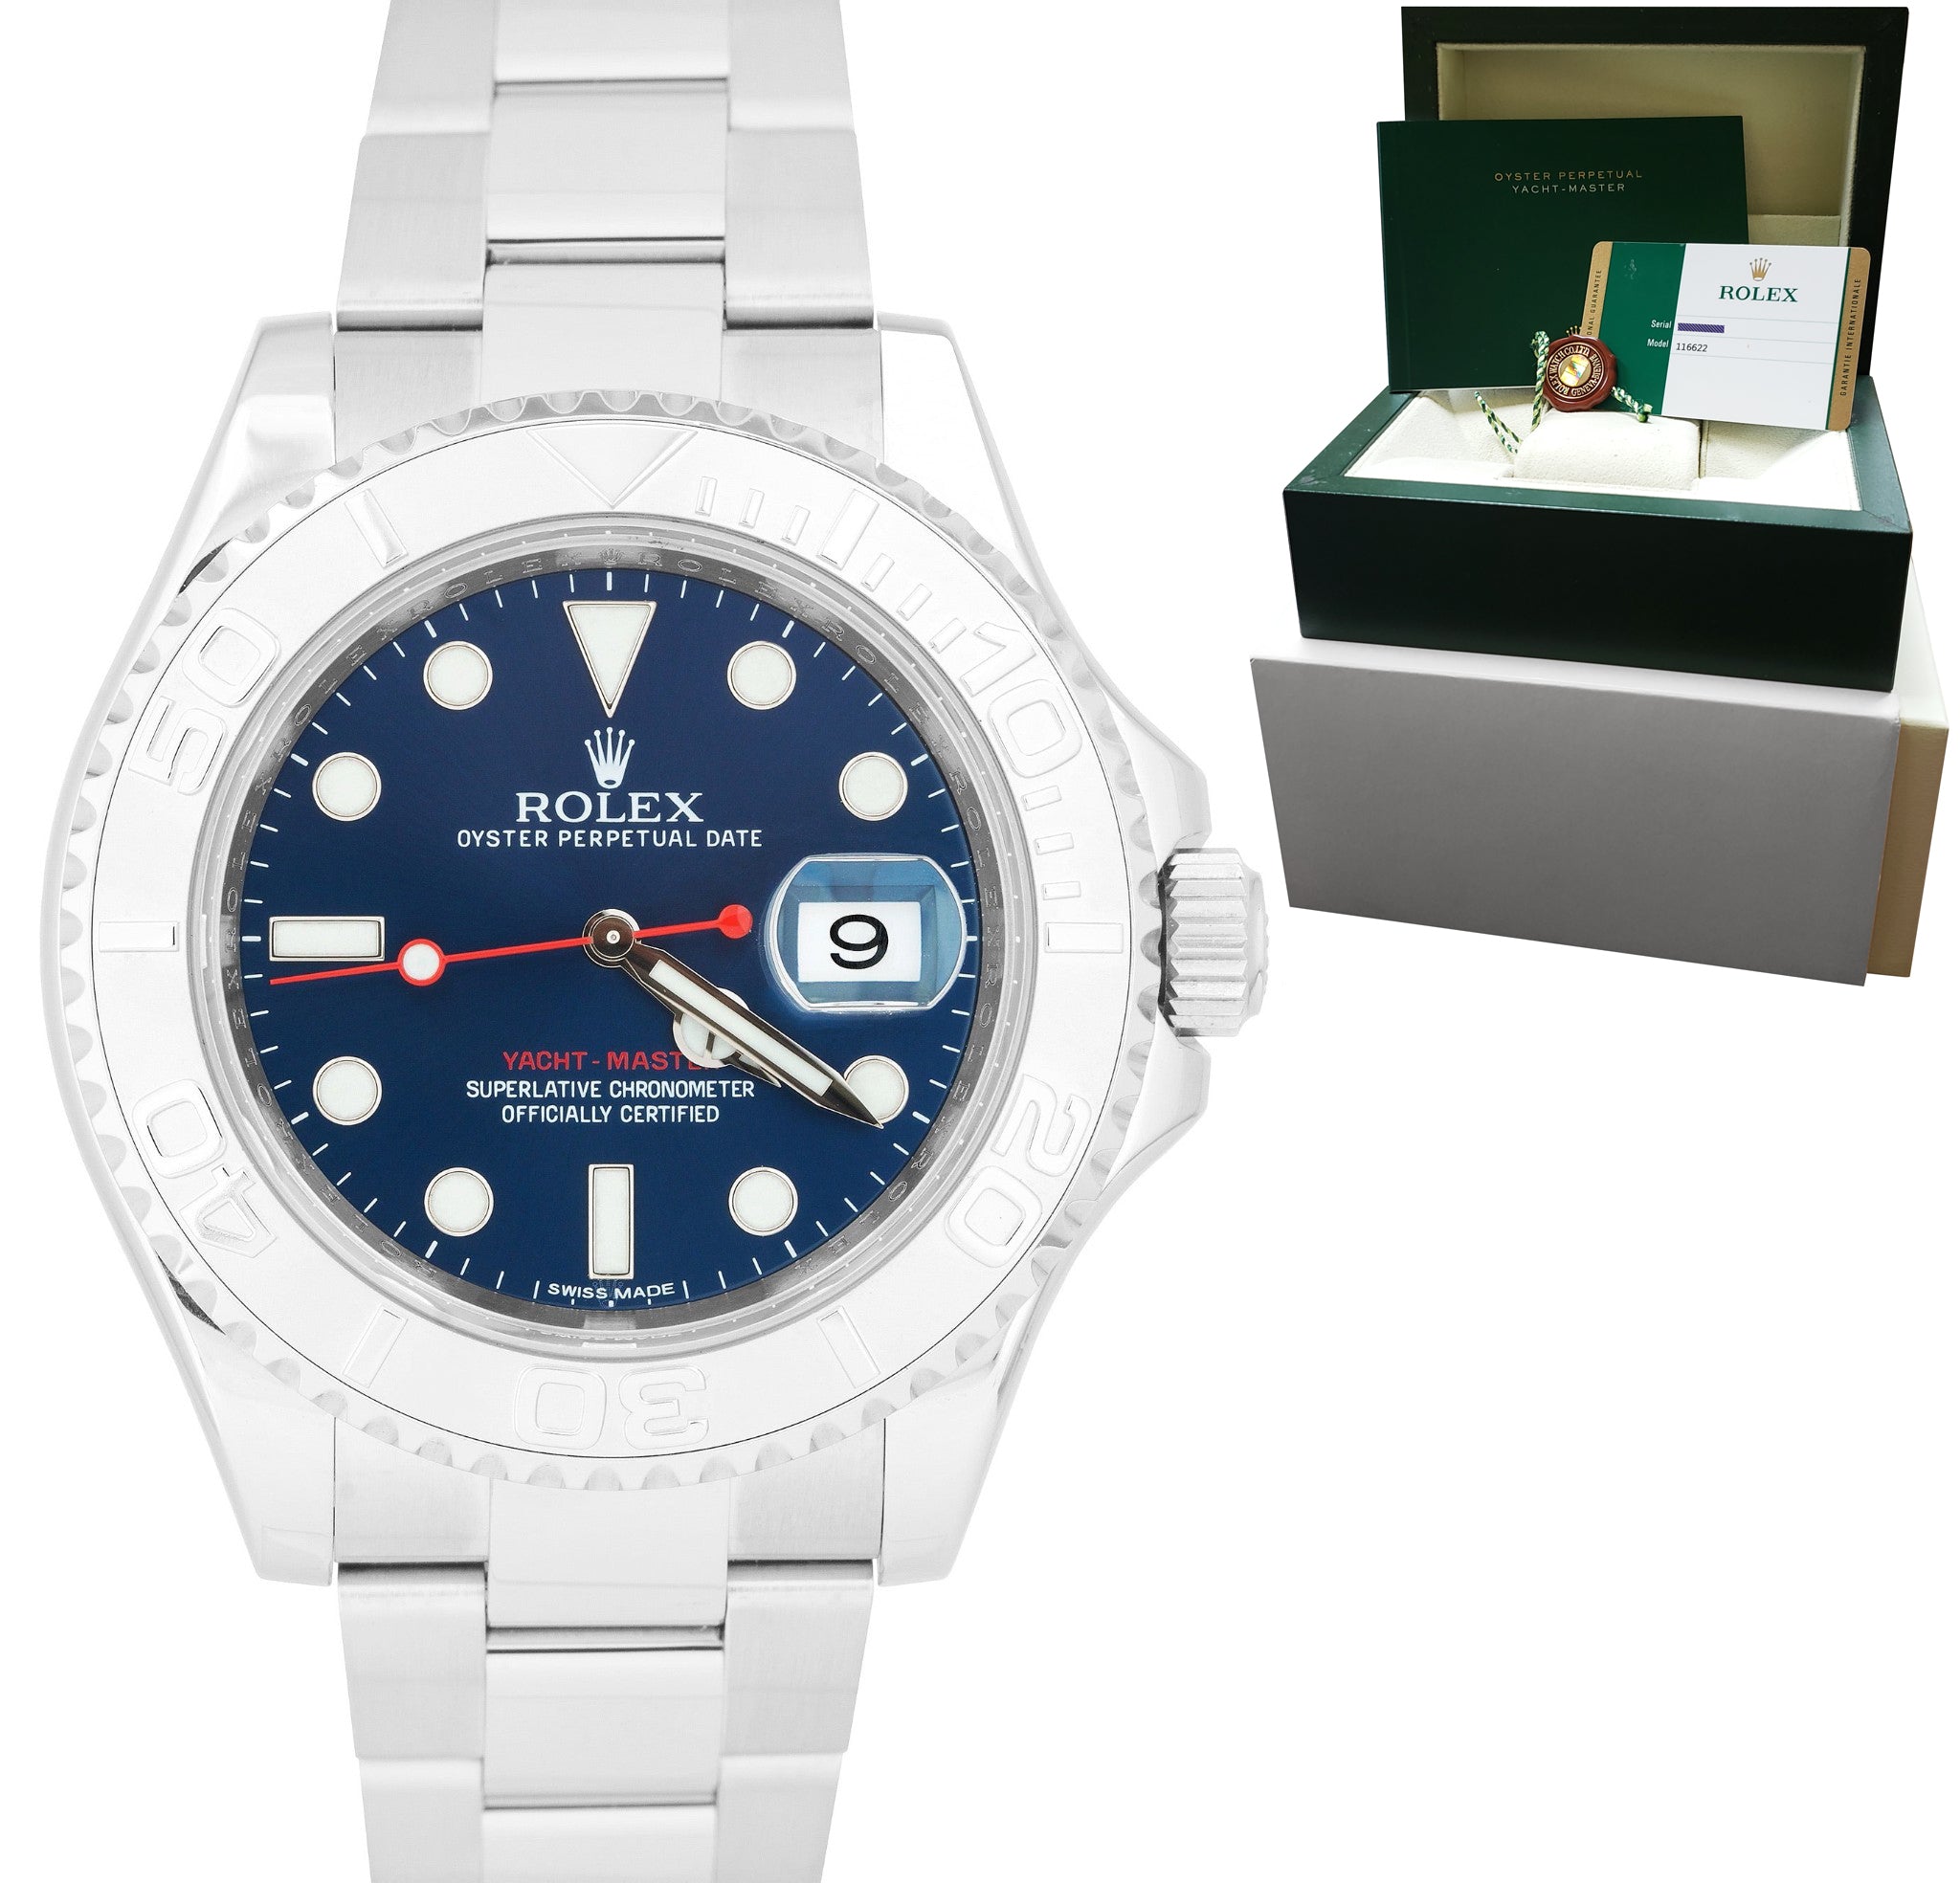 MINT 2014 Rolex Yacht-Master 40mm Blue Stainless Steel Oyster Watch 116622 B+P